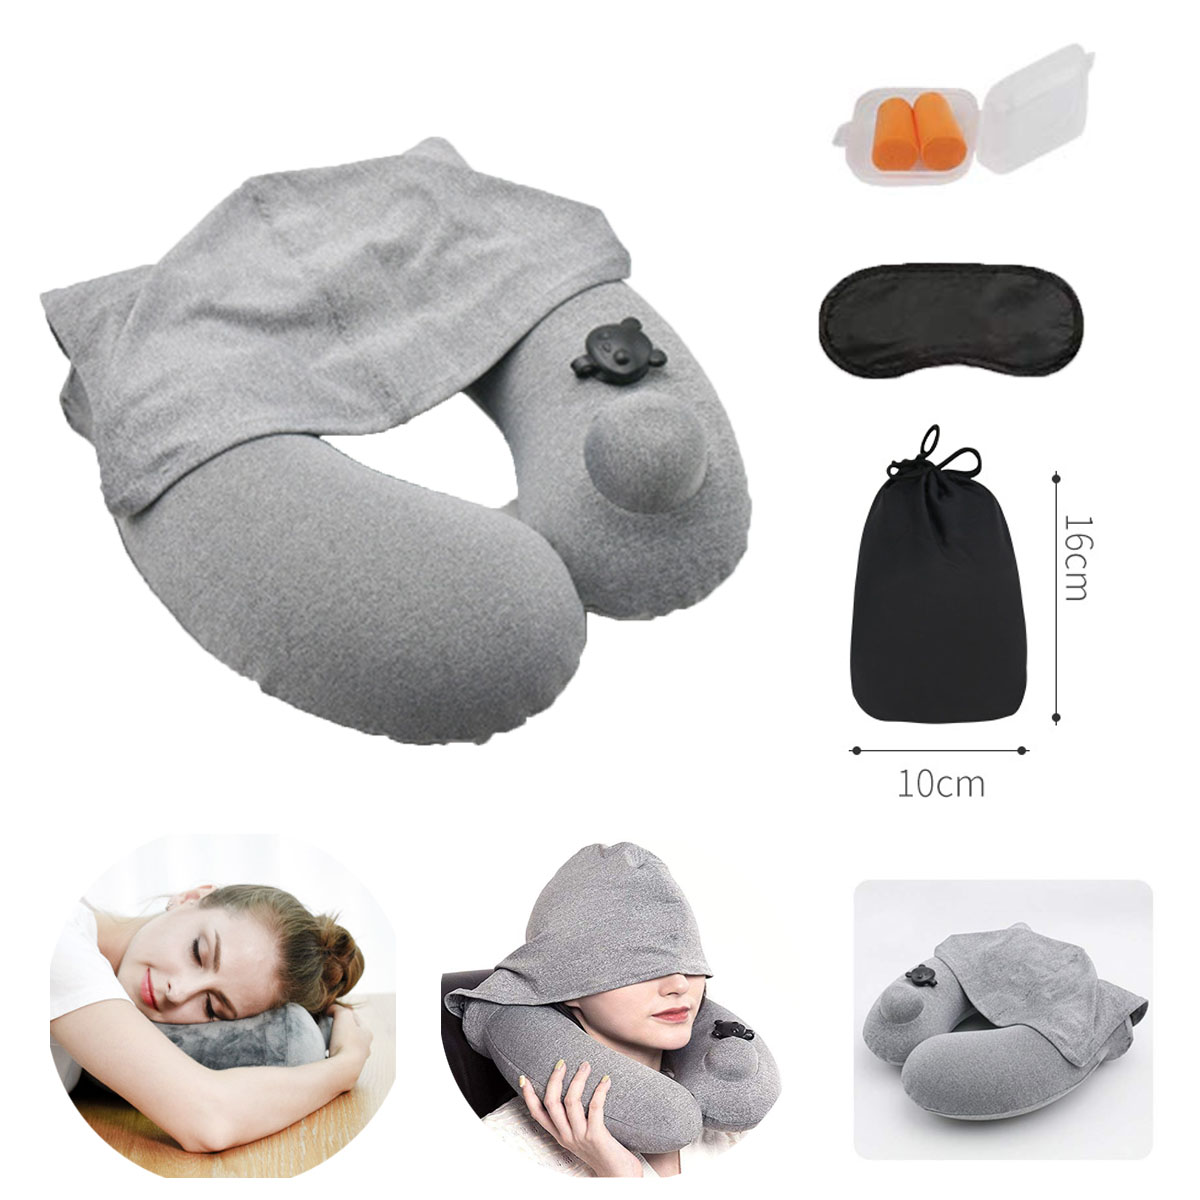 GL-AKL0116 Flocking Inflatable Neck Pillow With Hoodie